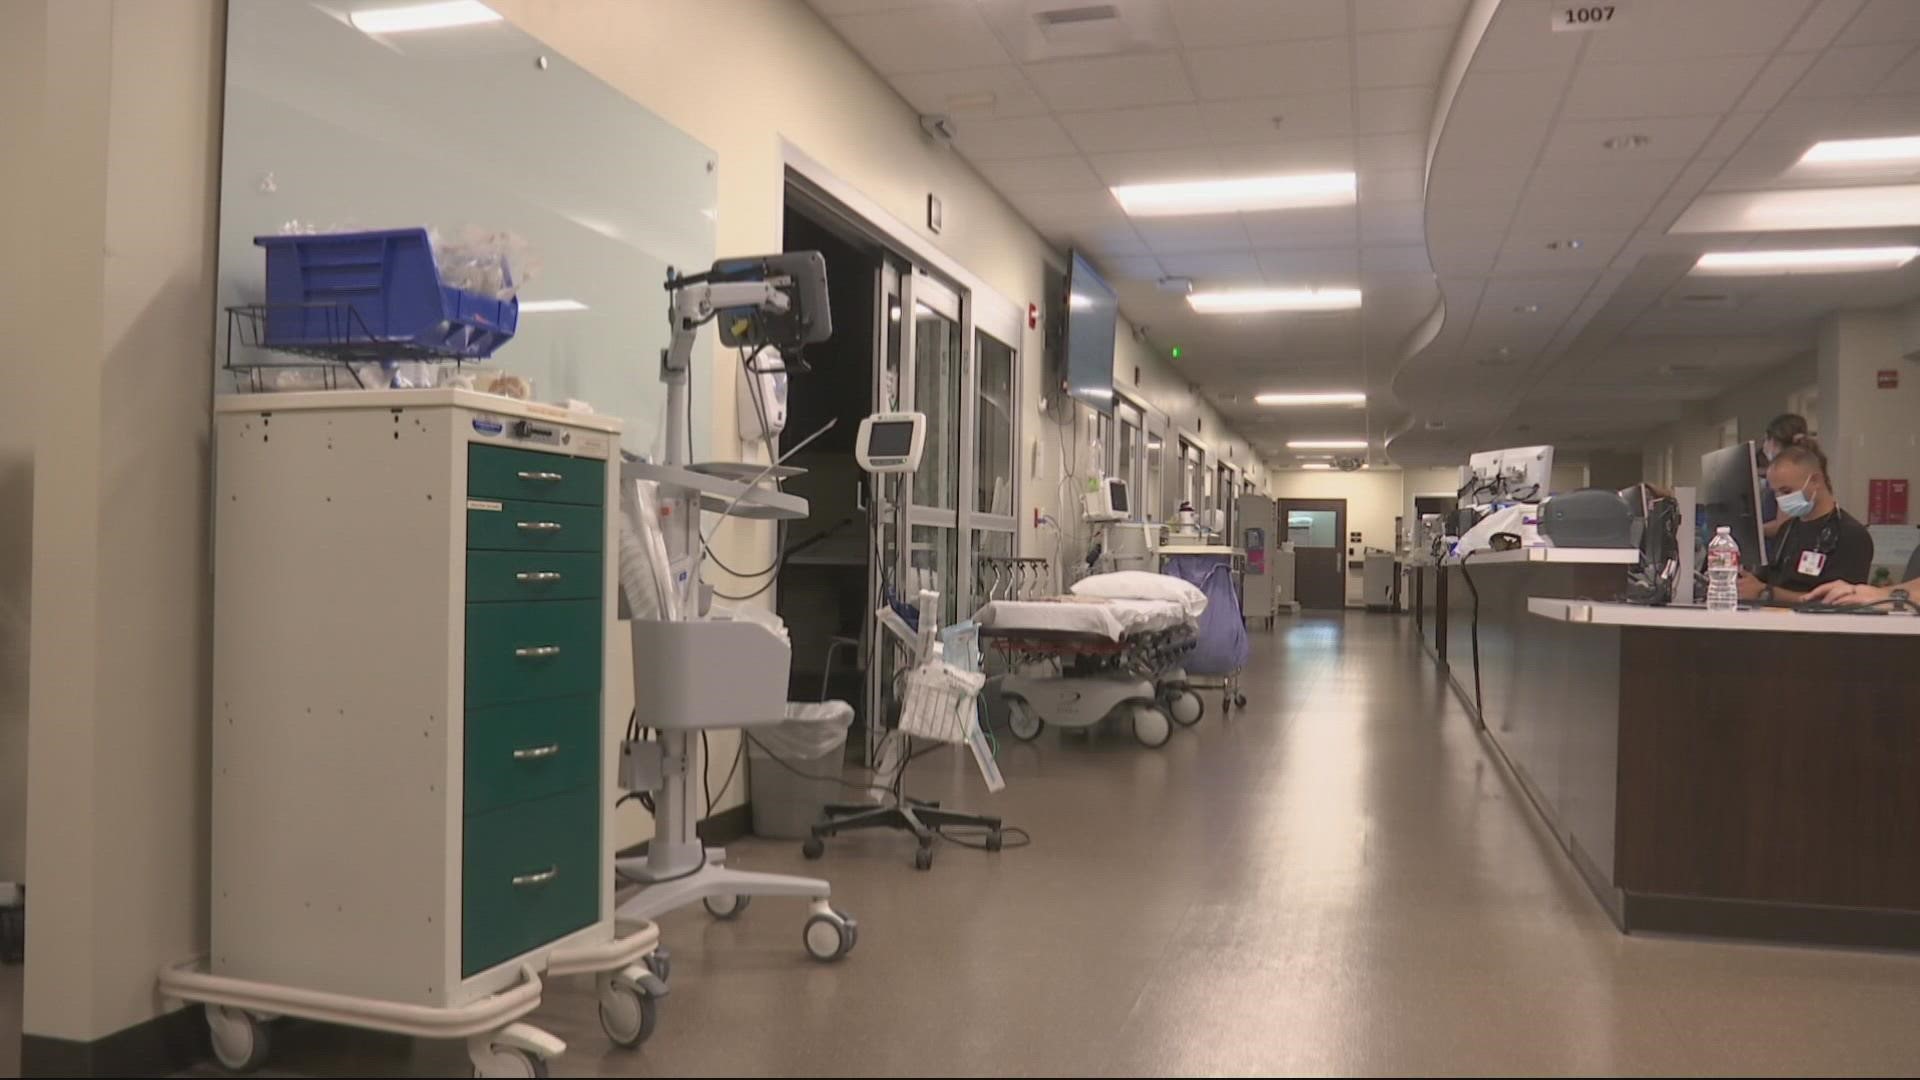 More than a quarter of the state's hospitalized COVID-19 patients are in the ICU.